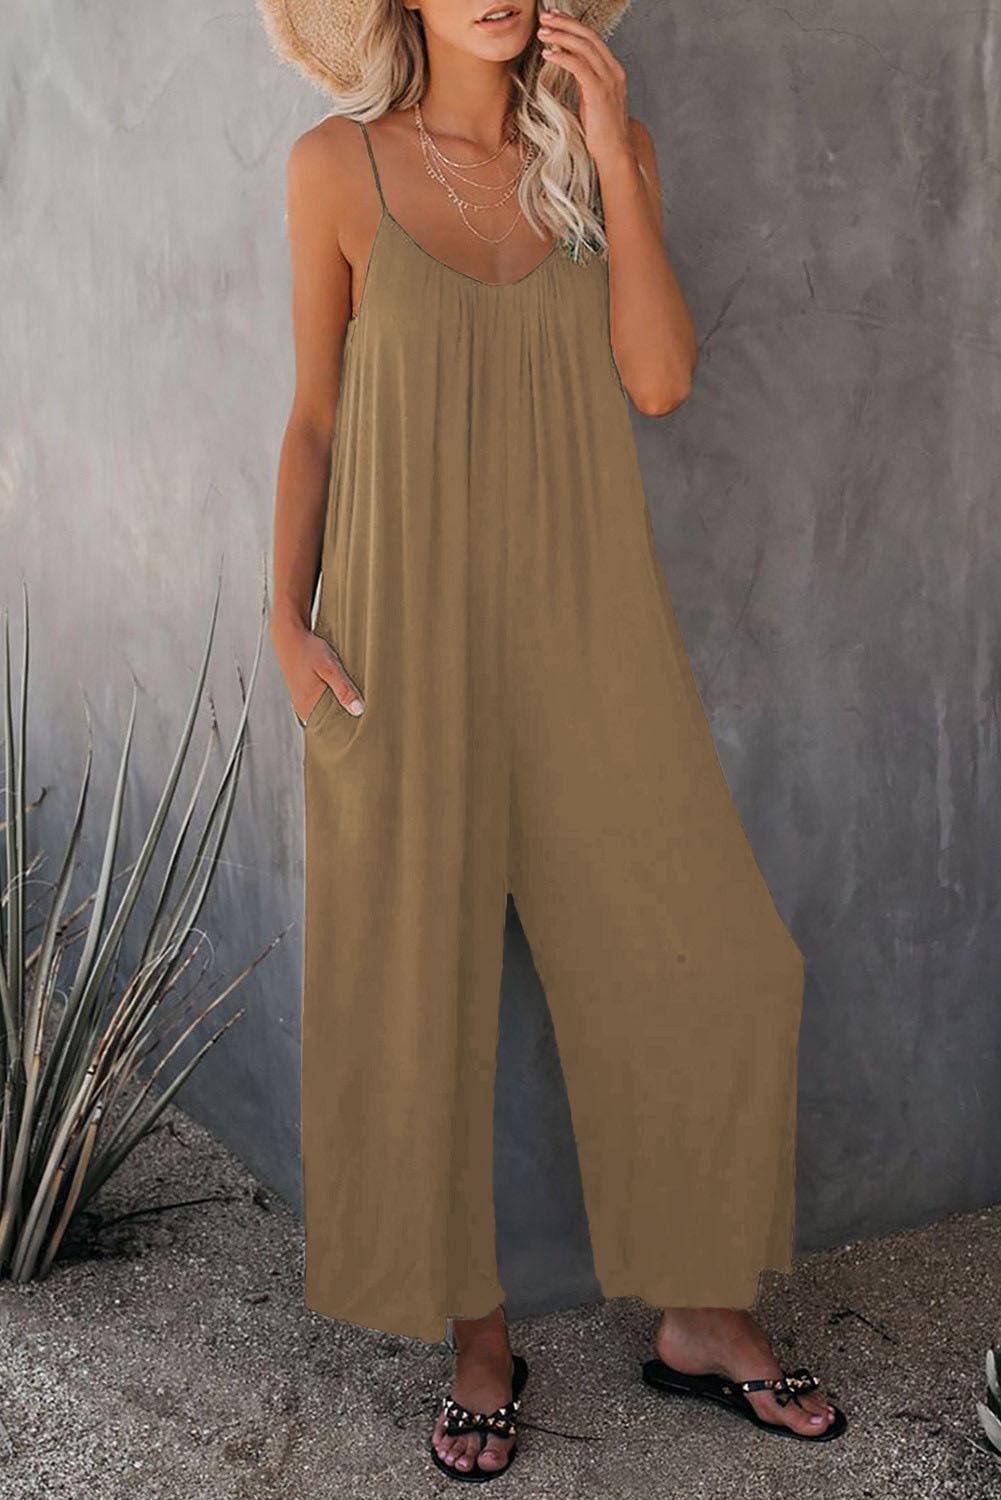 Women's Loose Sleeveless Jumpsuits Romper Jumpsuit With Pockets Long Pant Summer - AL MONI EXPRESS